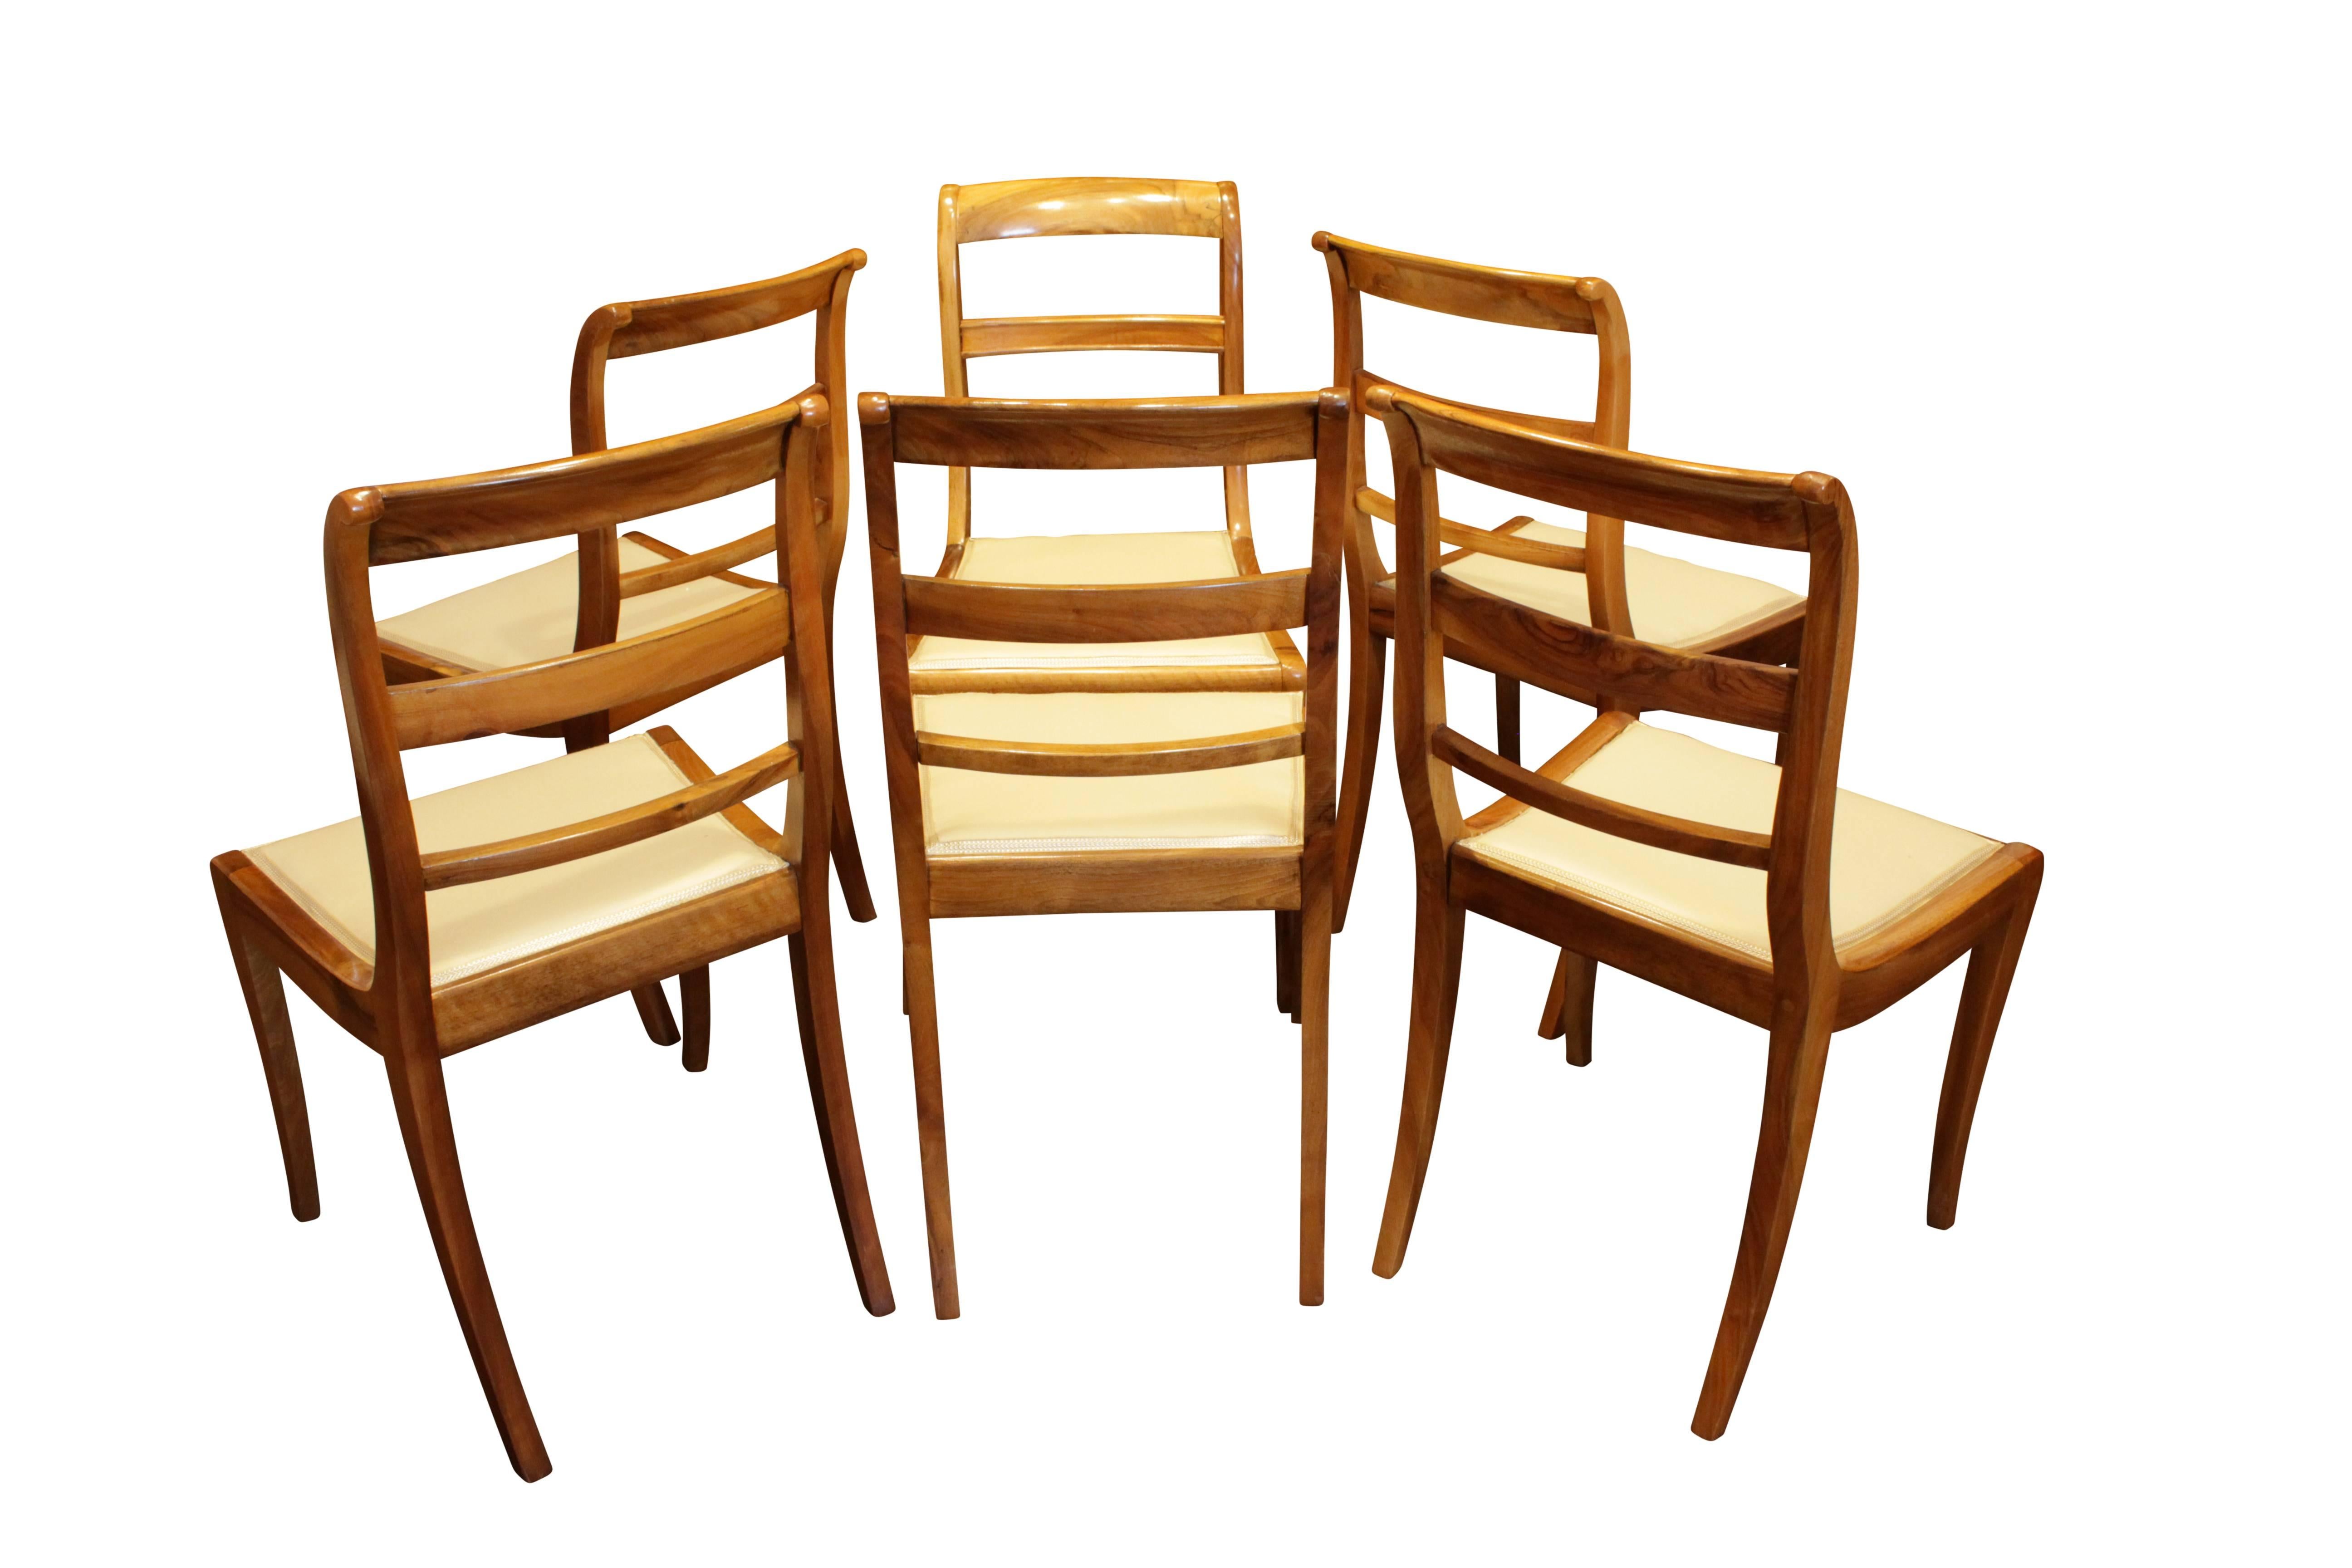 Polished 19th Century, Set of Six Solid Walnut Biedermeier Chairs from Germany For Sale